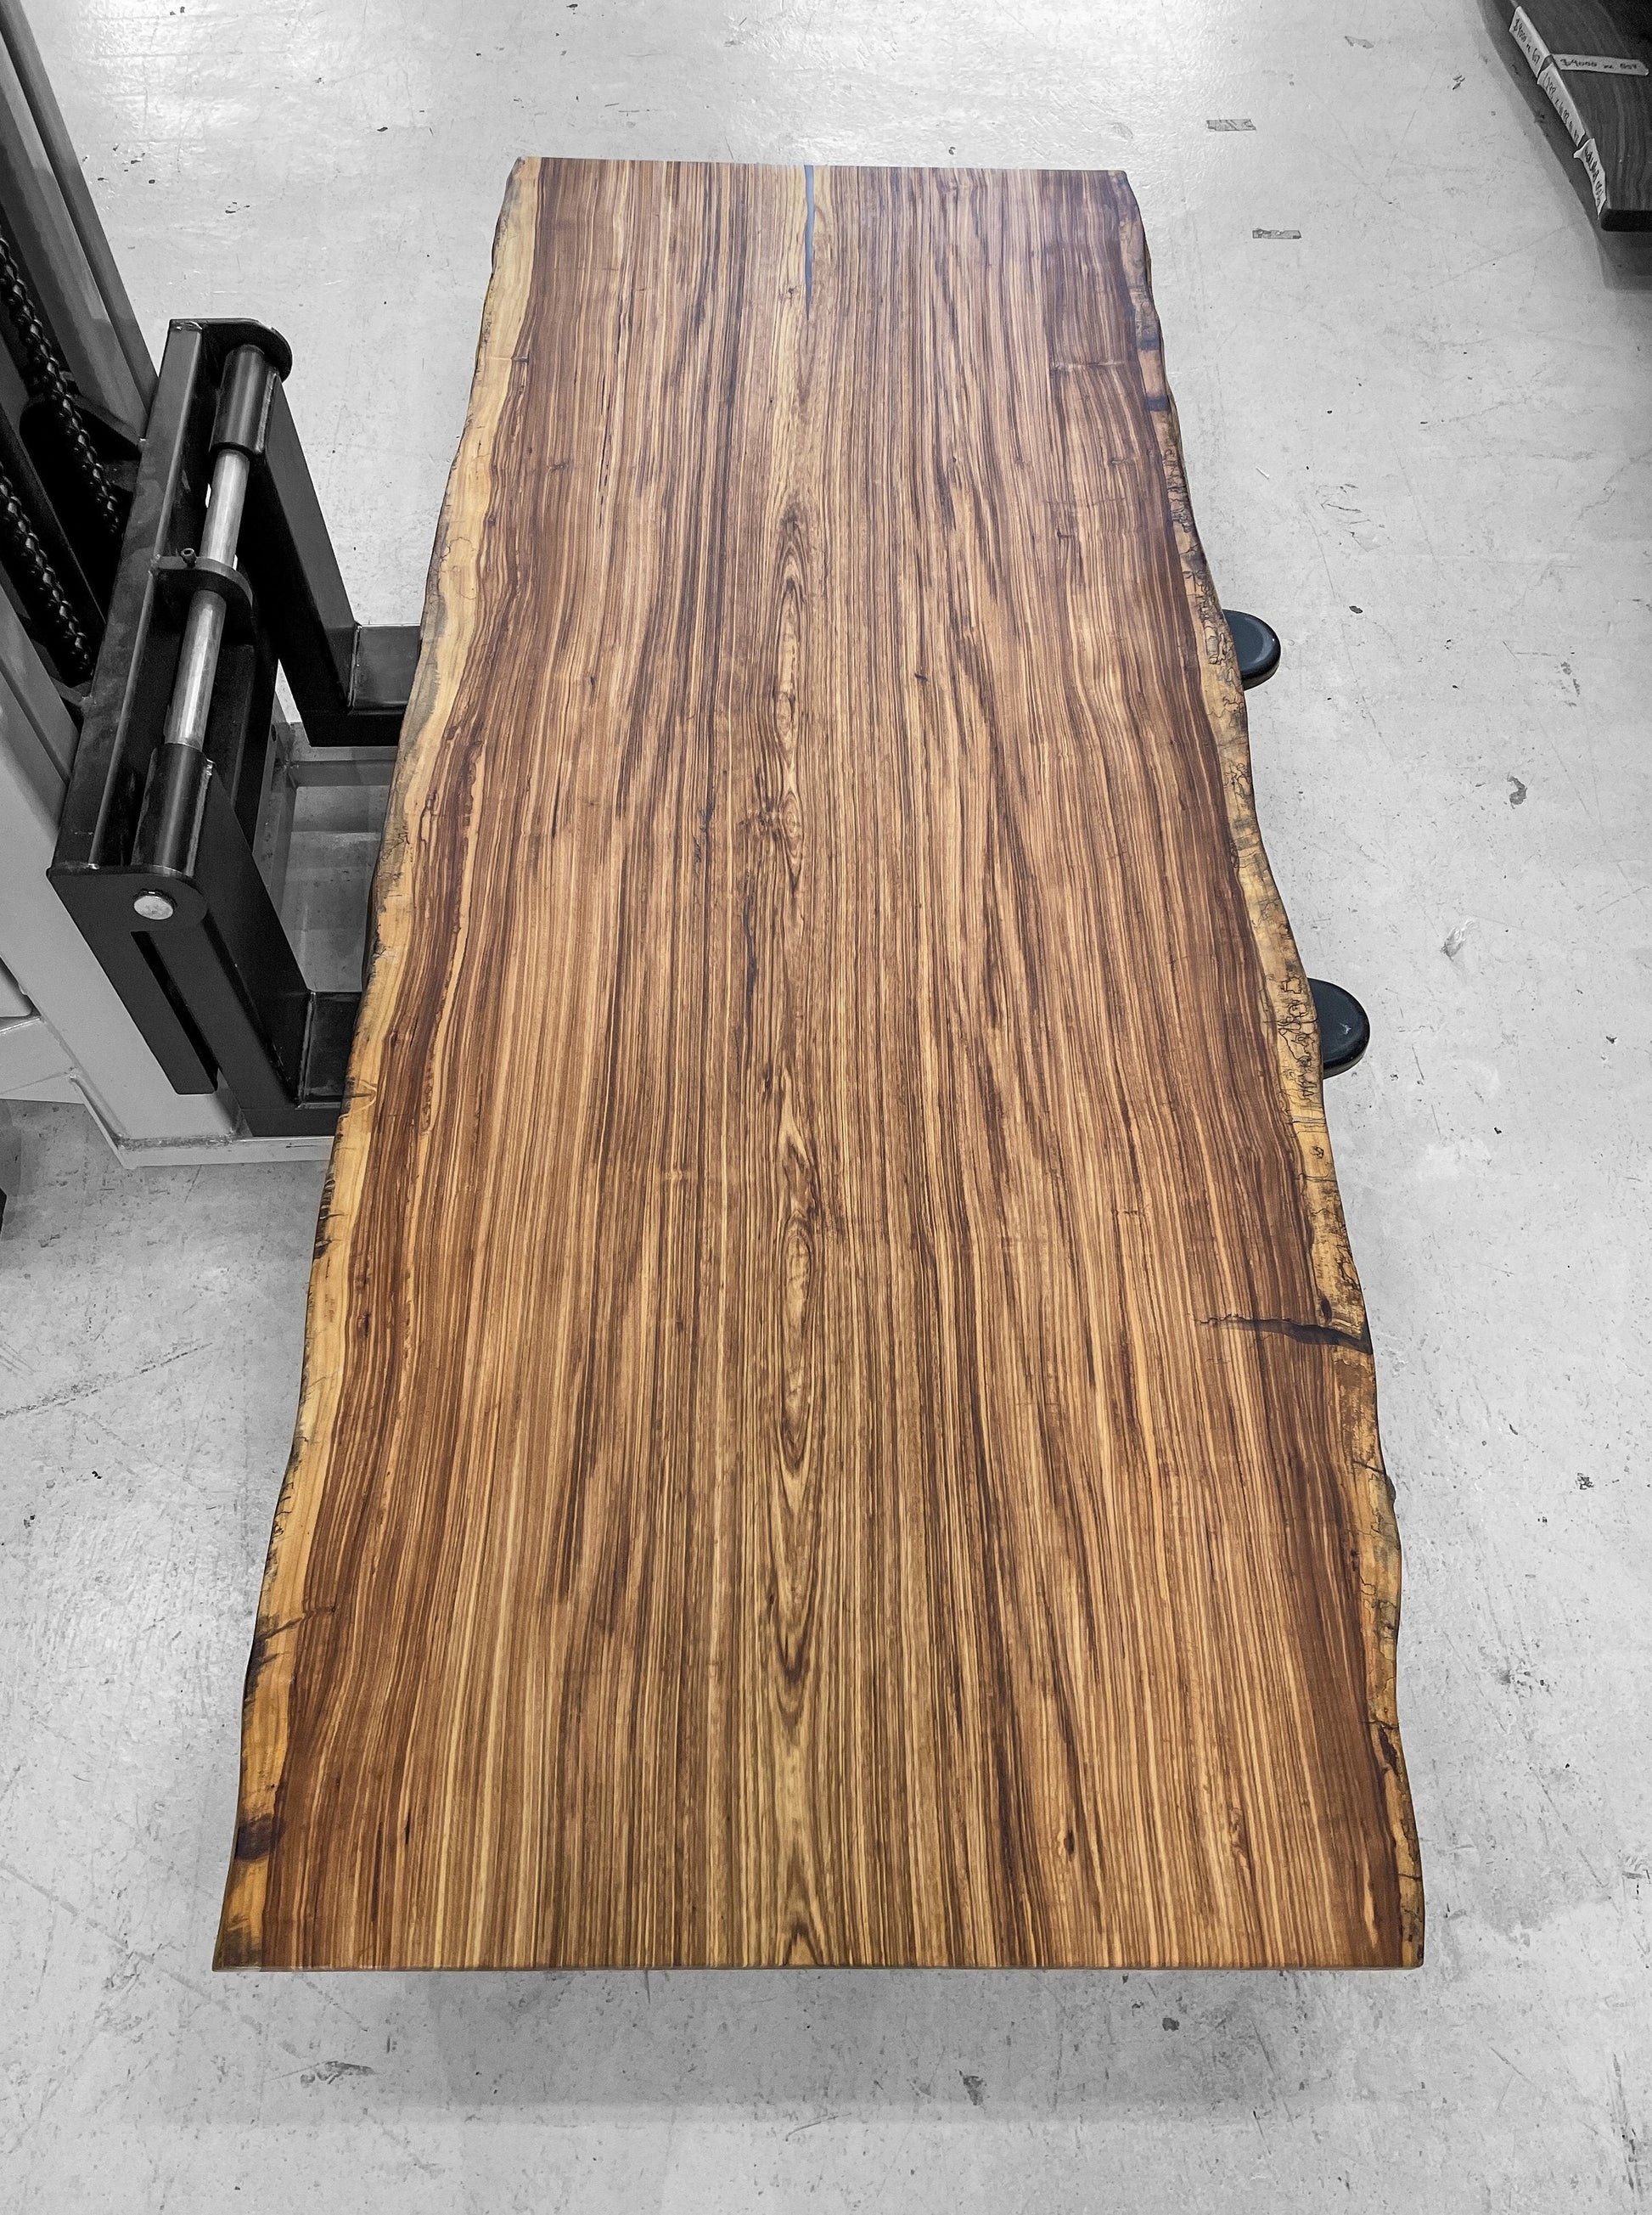 Live Edge Beli Wood Slab by The Table Guy